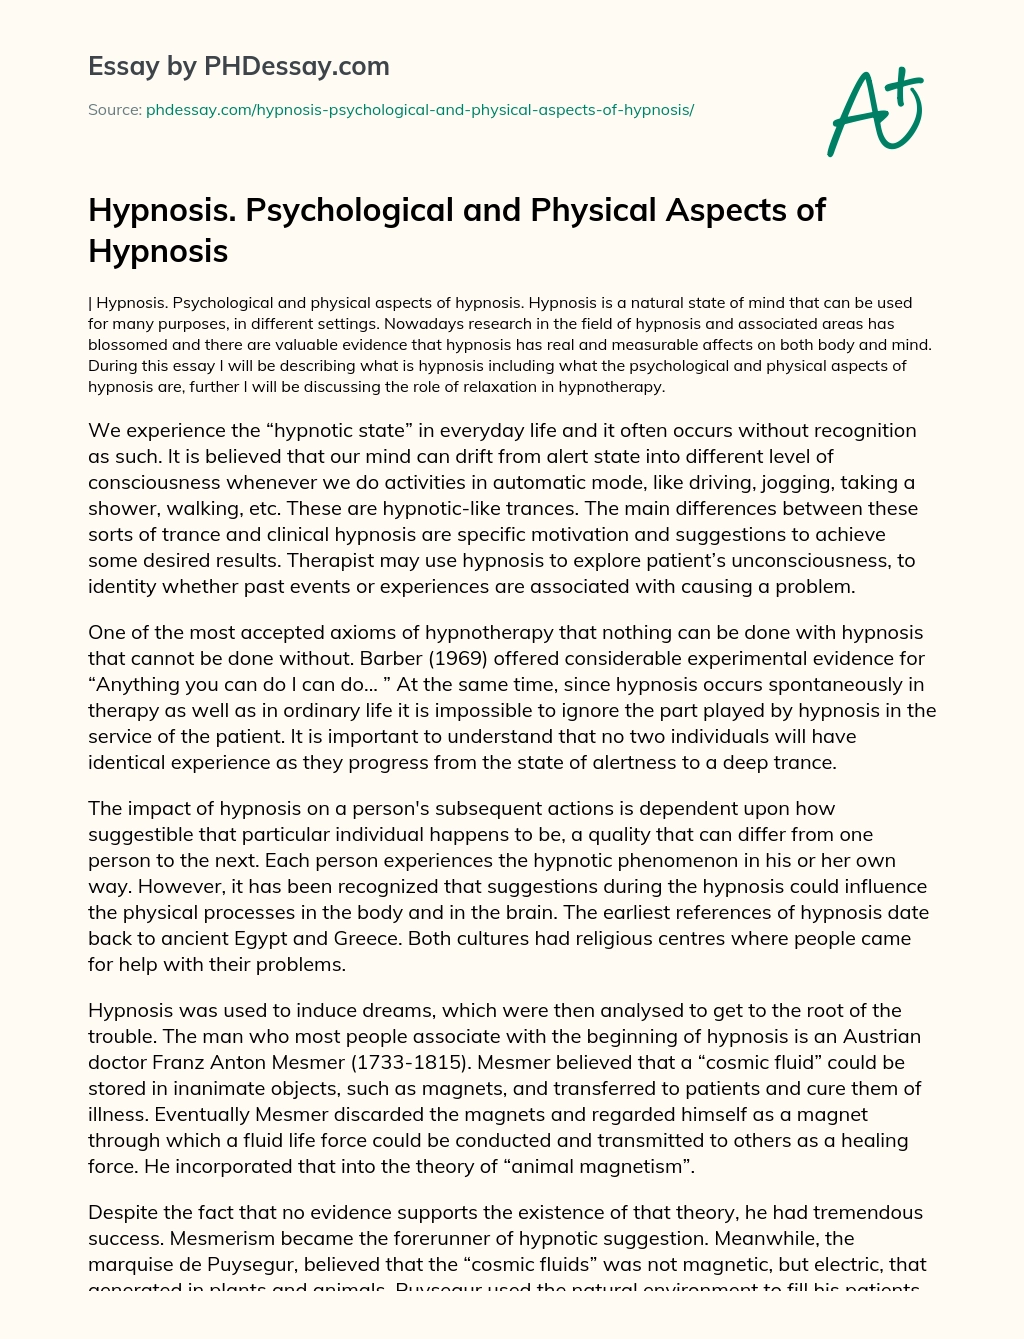 Hypnosis. Psychological and Physical Aspects of Hypnosis essay